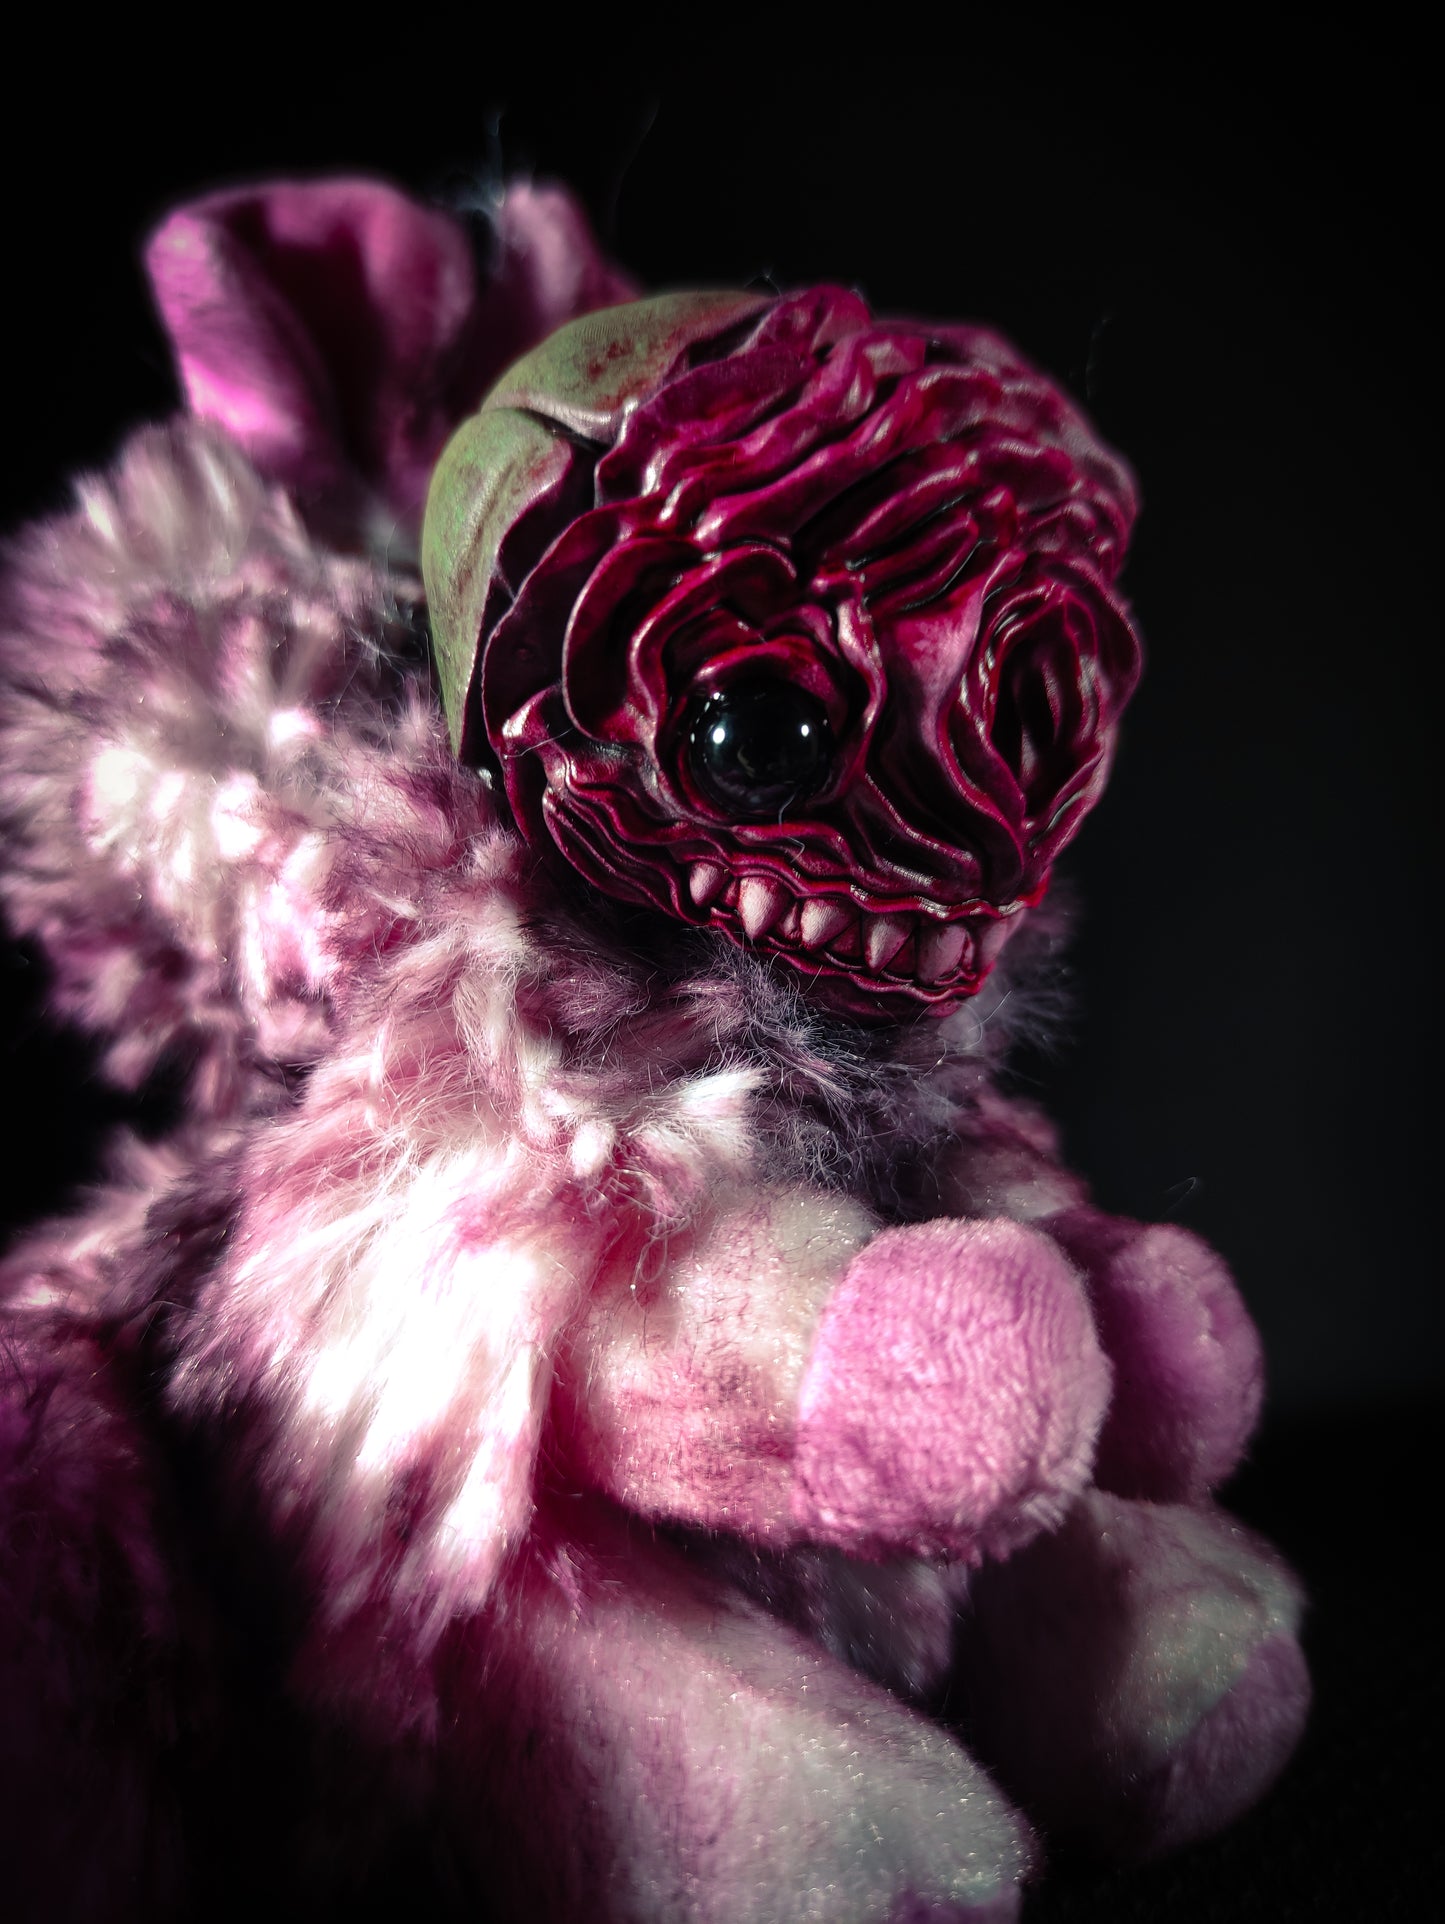 FRIEND Pink Rose Flavour - Cryptid Art Doll Plush Toy